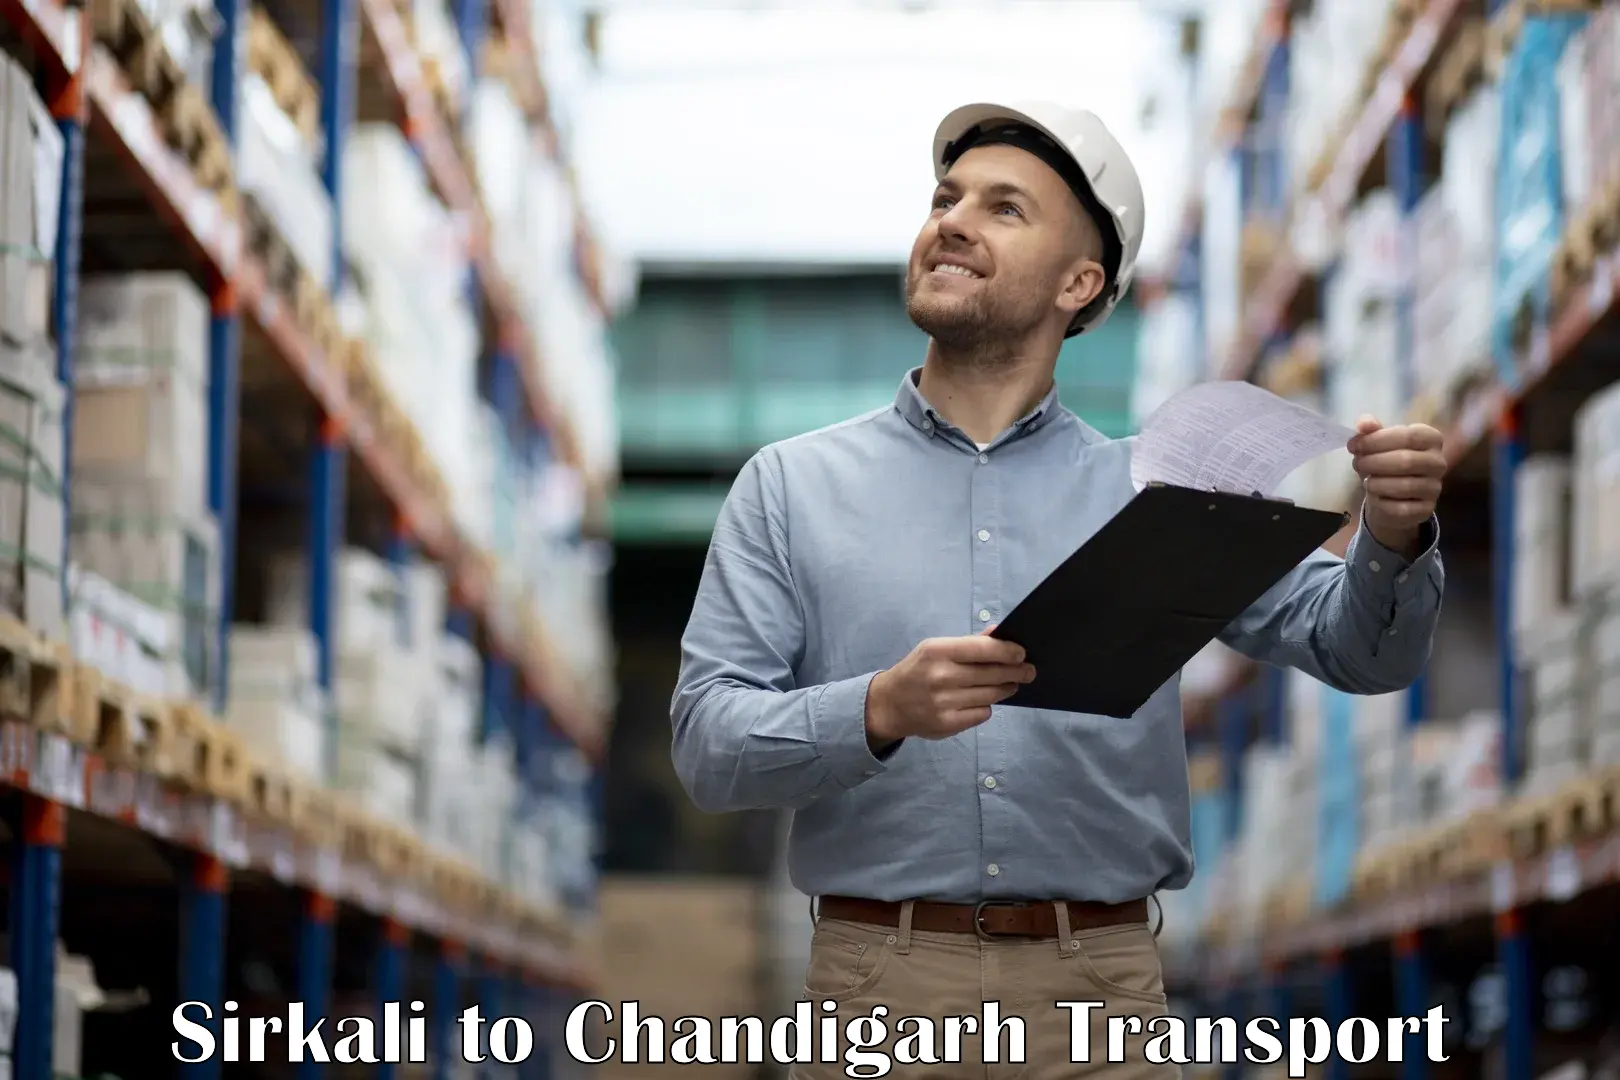 Truck transport companies in India Sirkali to Chandigarh